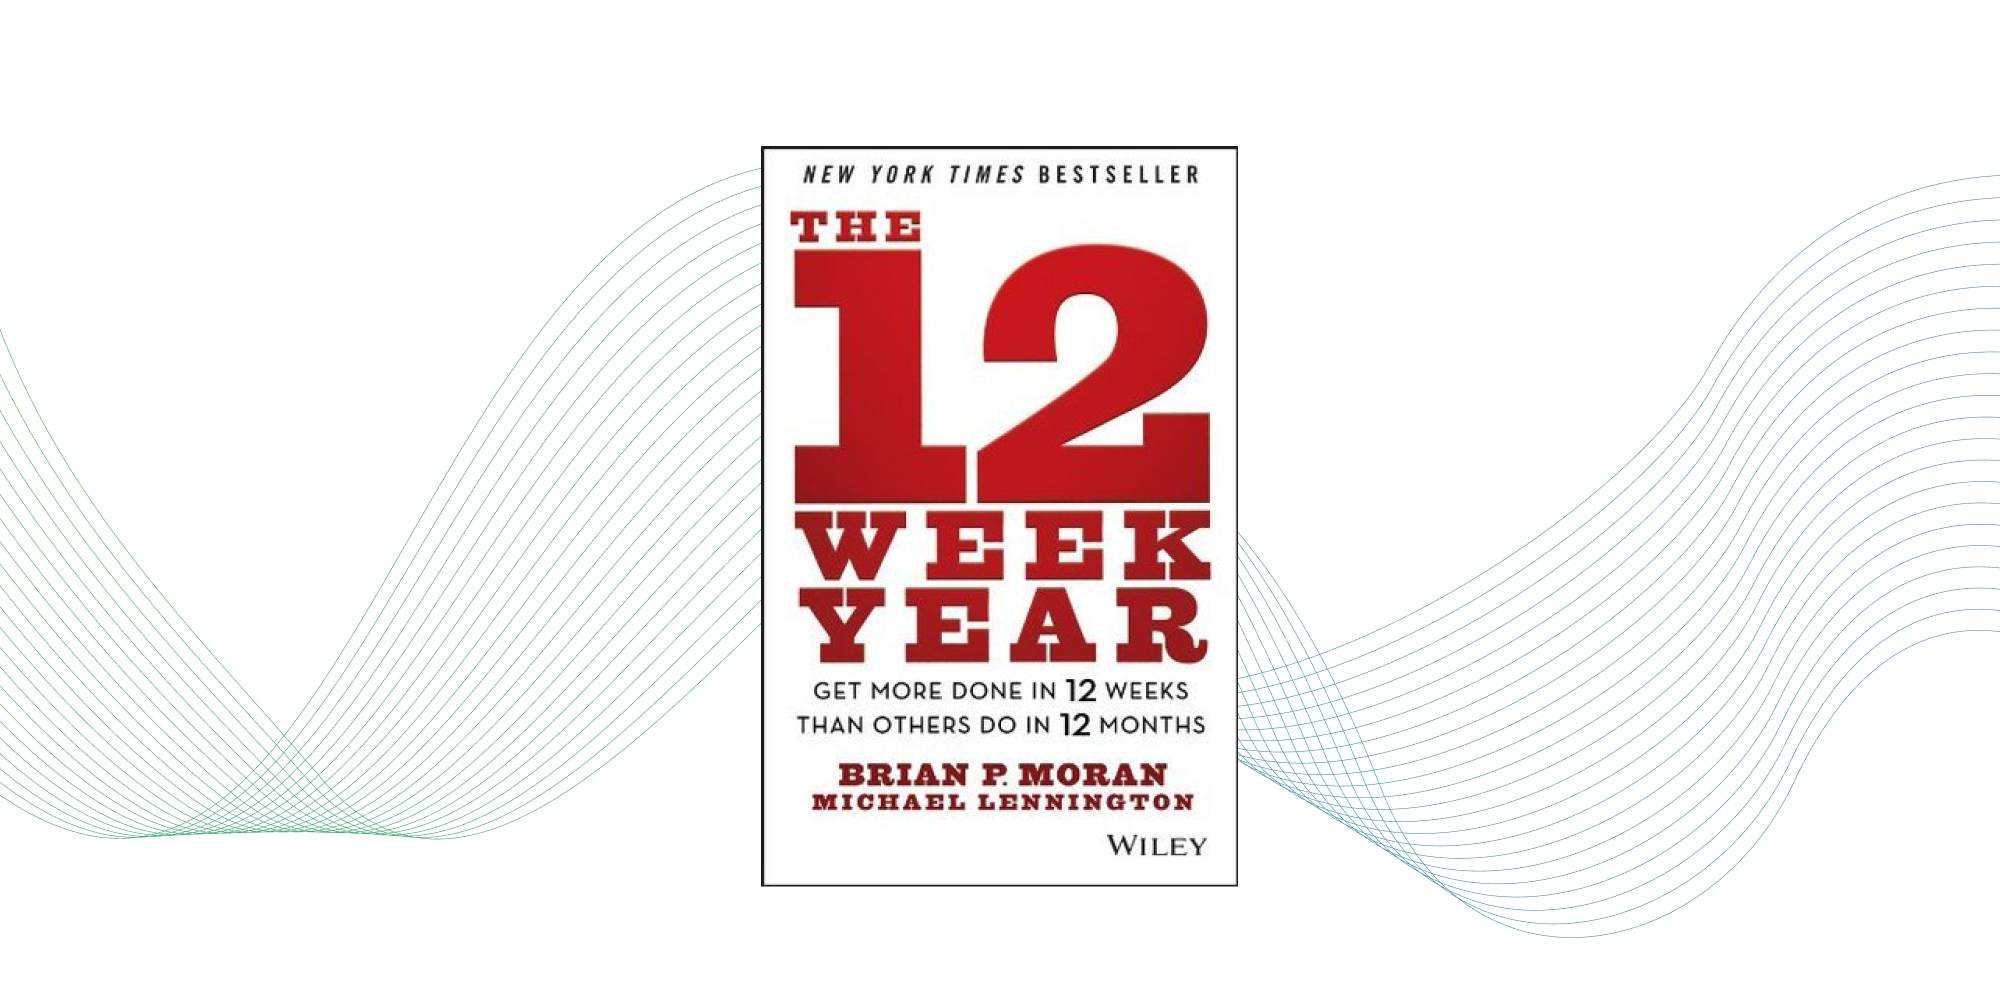 12 week year book cover books on productivity